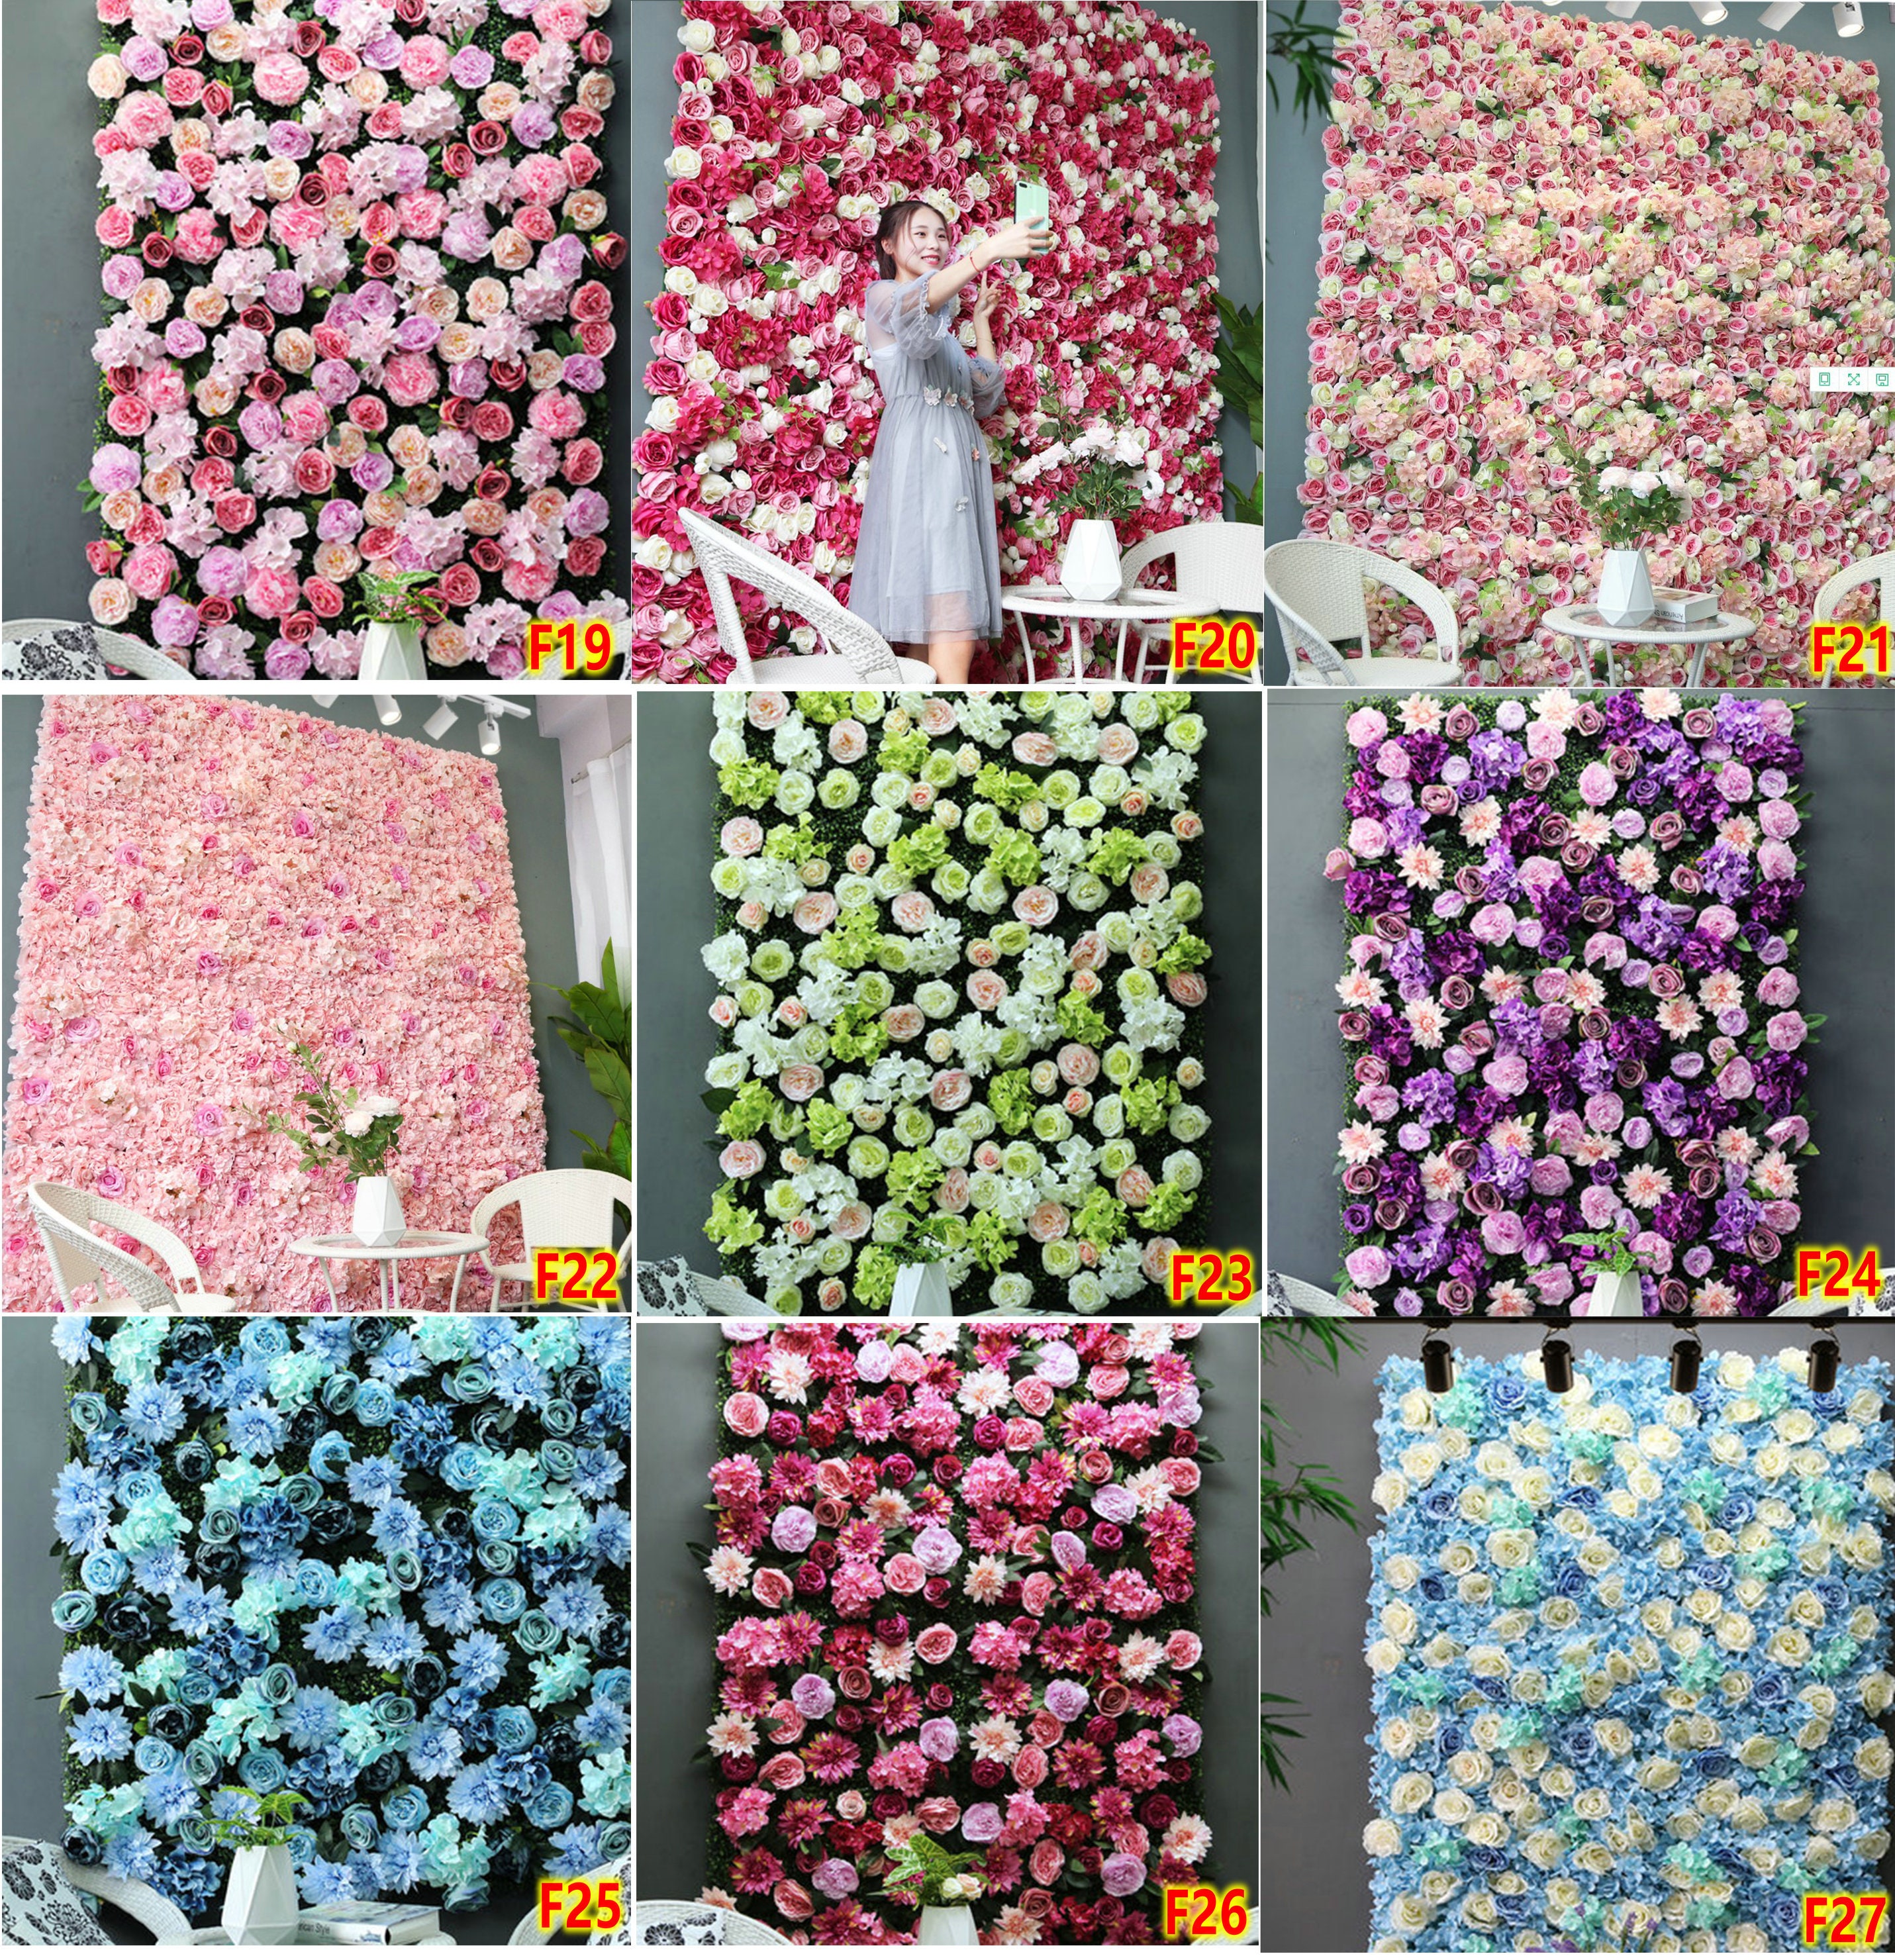 HONGMEIHUI Artificial Flower Wall Panel 3D Rose Wall Backdrop Flloral Wall  Pared de Flores Artificiales para Decoracion Pink Flower Wall Panels Decor  for Home Weding Party Decoration(Red): Artificial Flowers